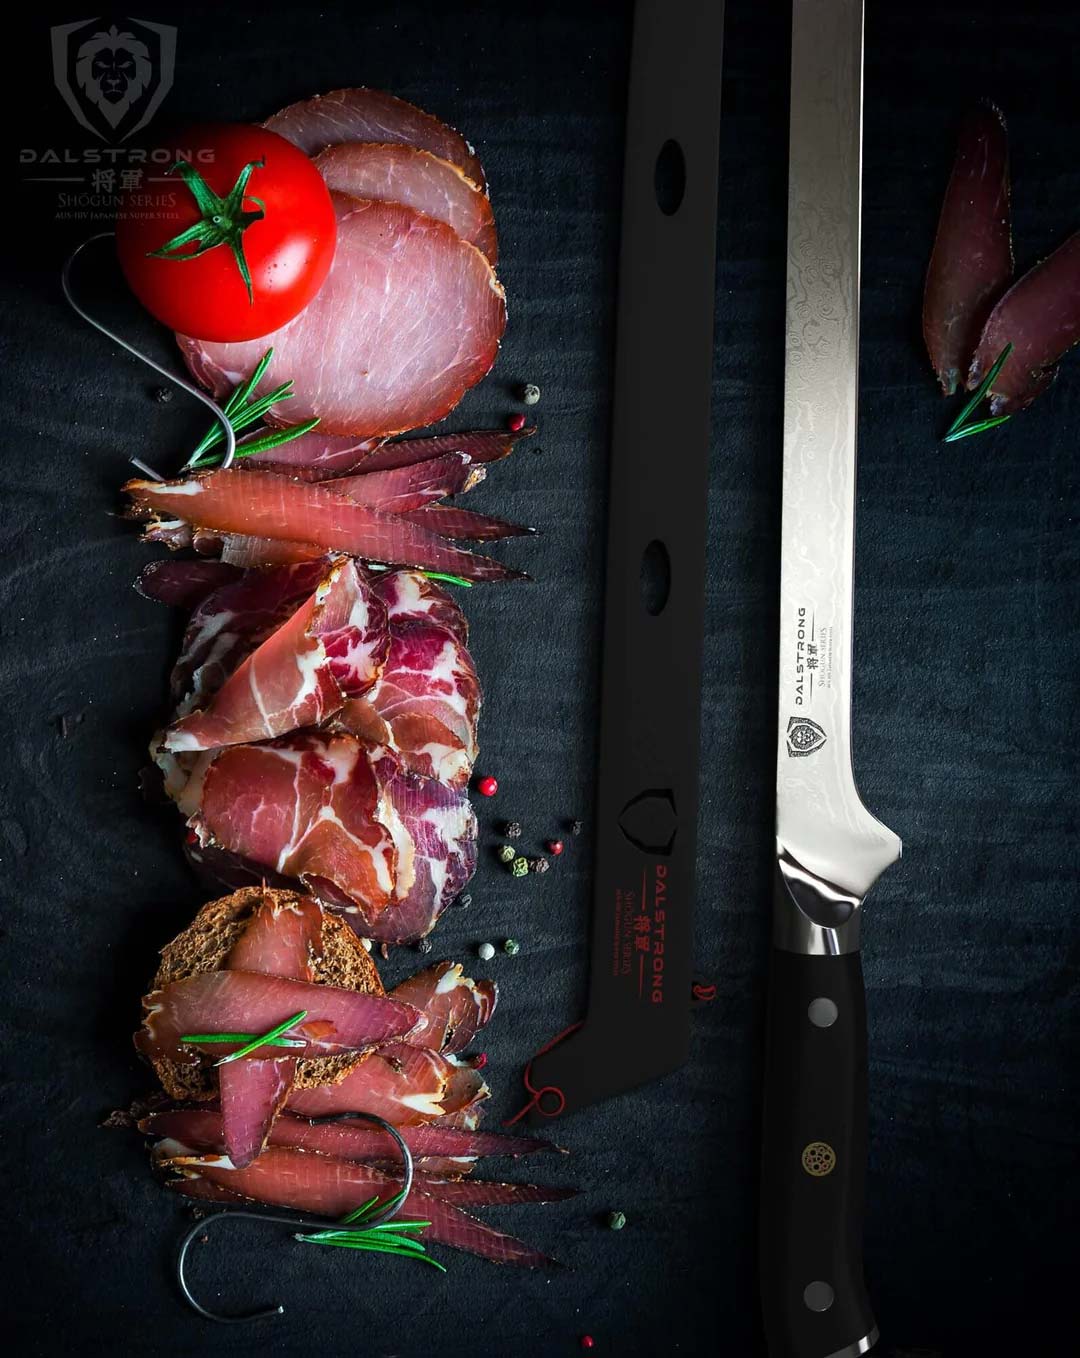 Dalstrong shogun series 12 inch spanish slicer knife with black handle and different slices of ham on the side.